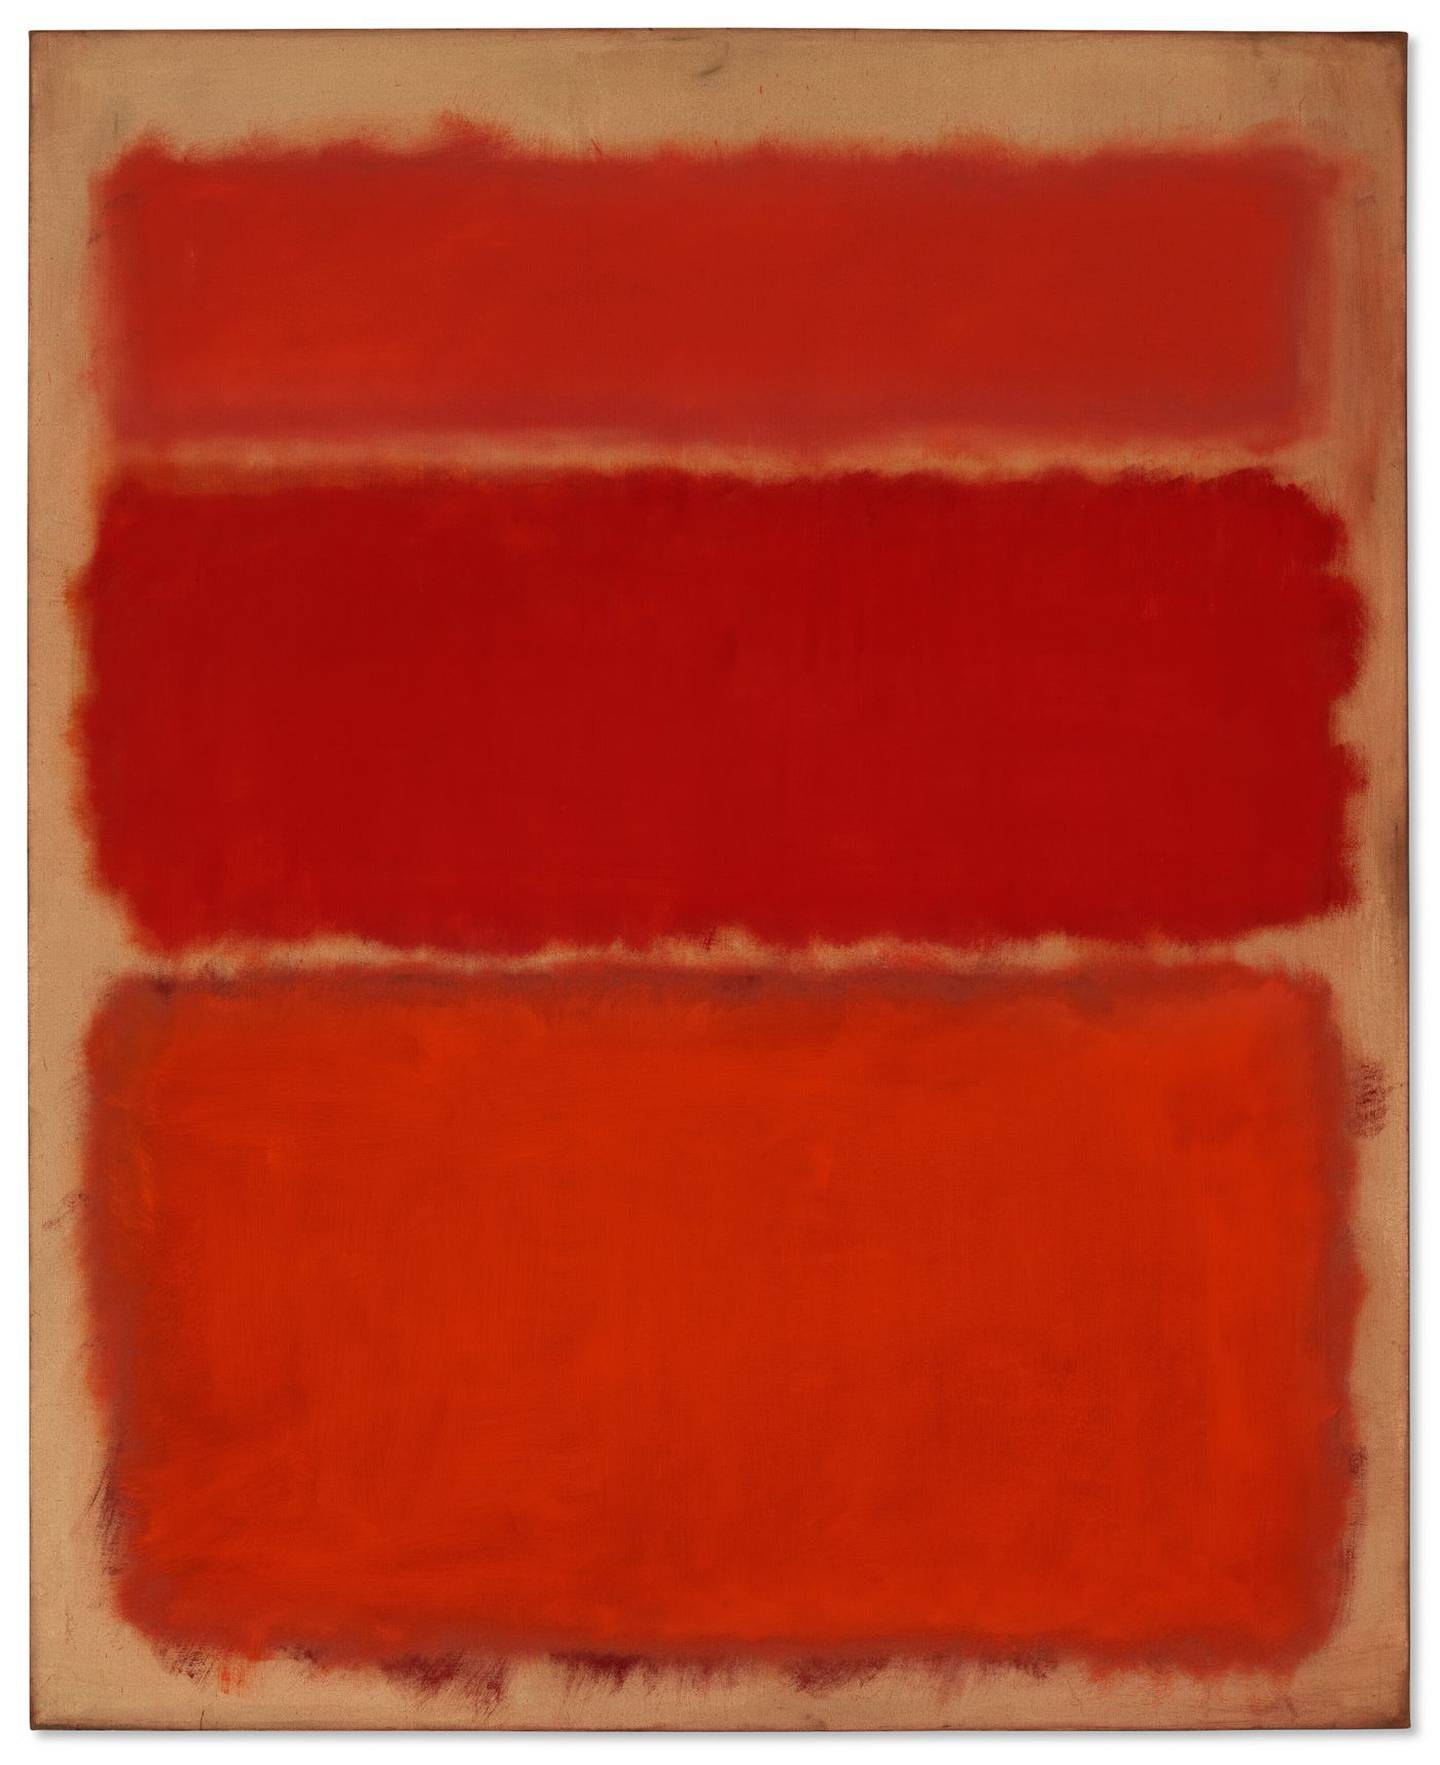 Untitled (Shades of Red), 1961, by Mark Rothko.dfd